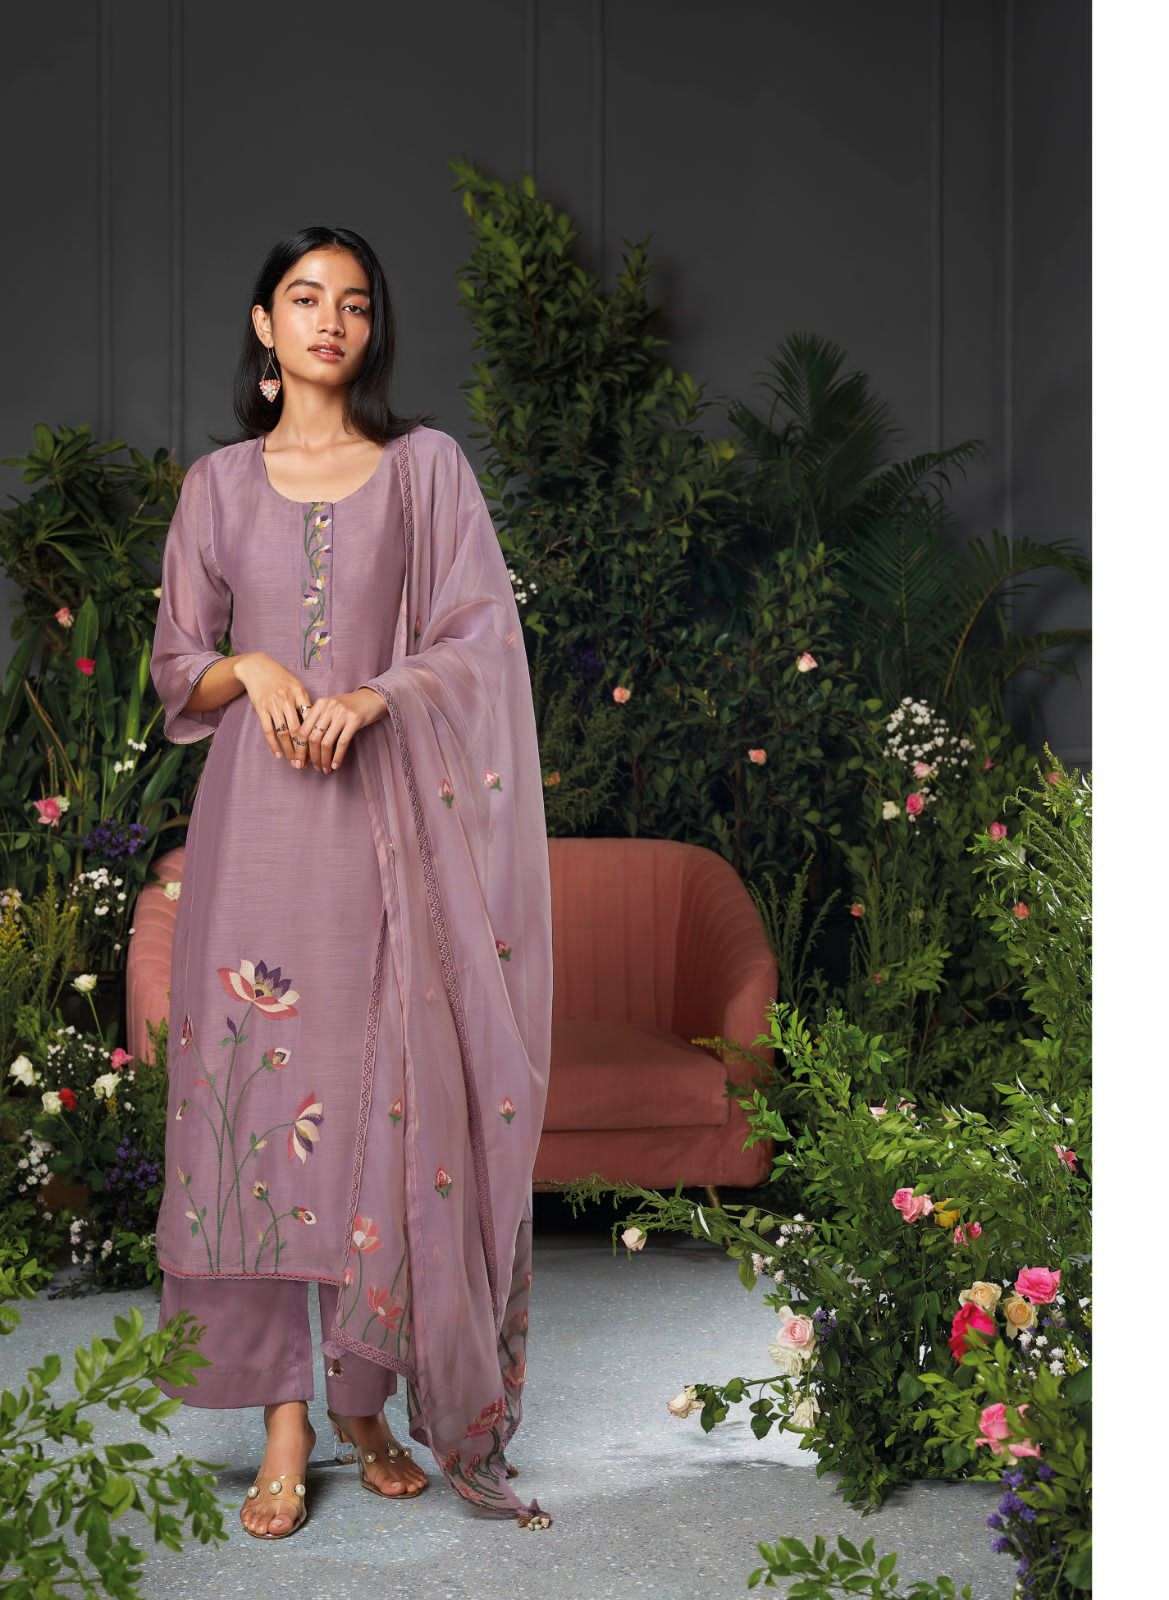 Ganga Suits Online Shopping For Women at Wholesale Price